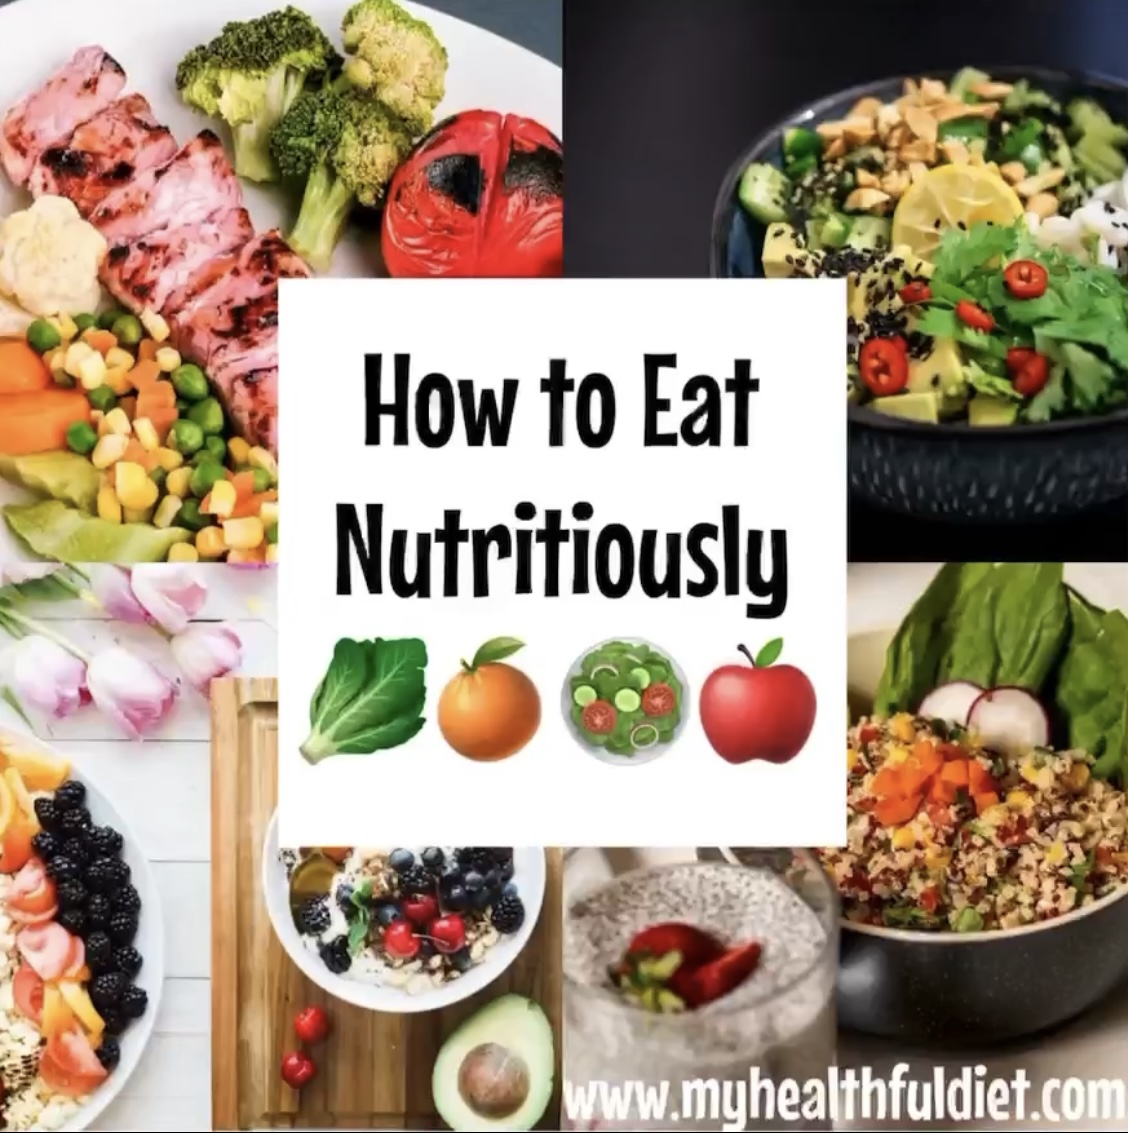 How to eat Nutritiously